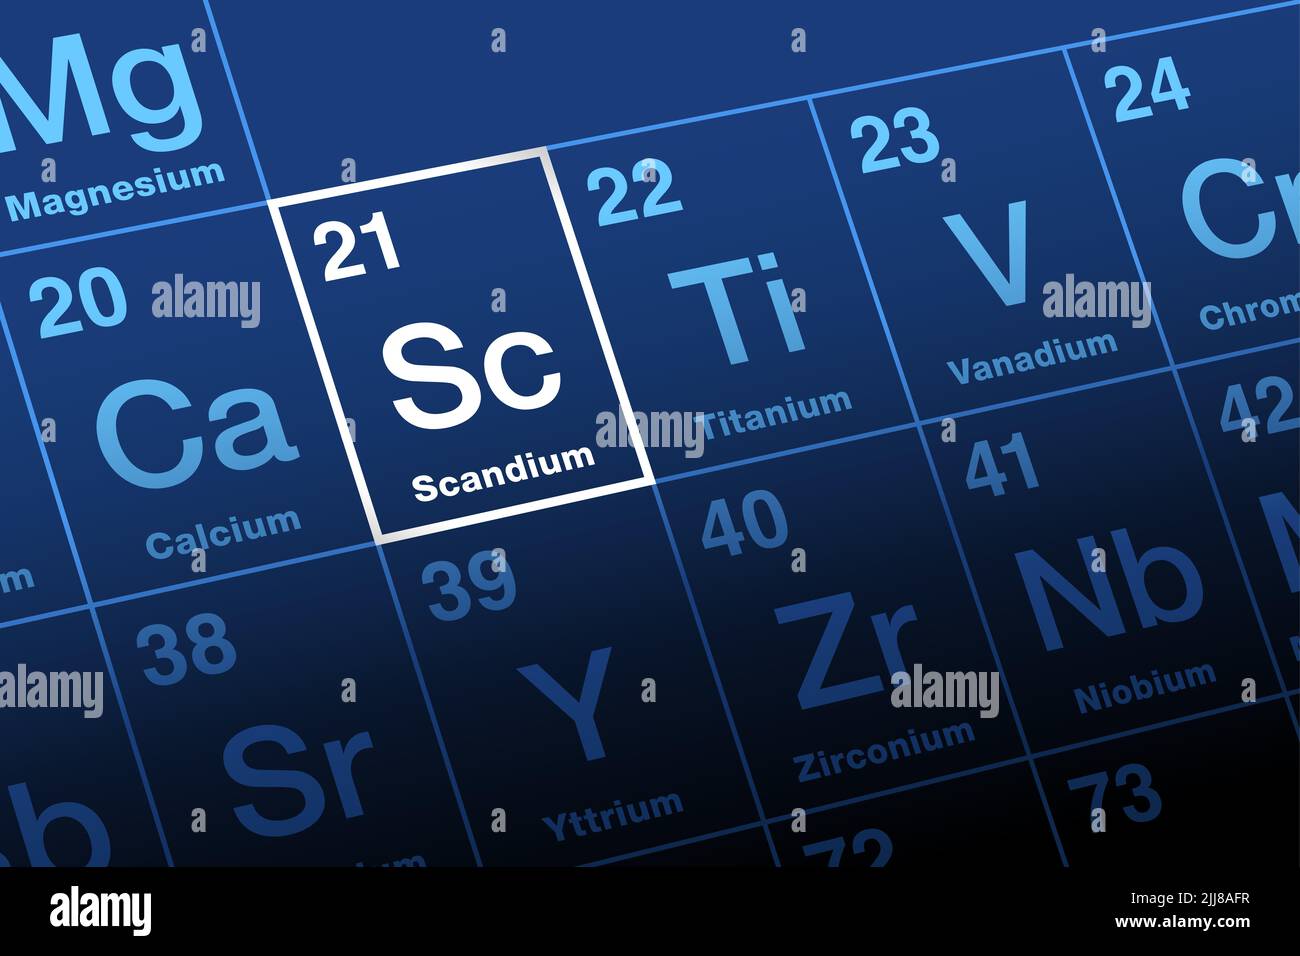 Scandium on periodic table. Soft metal and rare earth element, with symbol Sc from the Latin Scandia, meaning Scandinavia, and with atomic number 21. Stock Photo